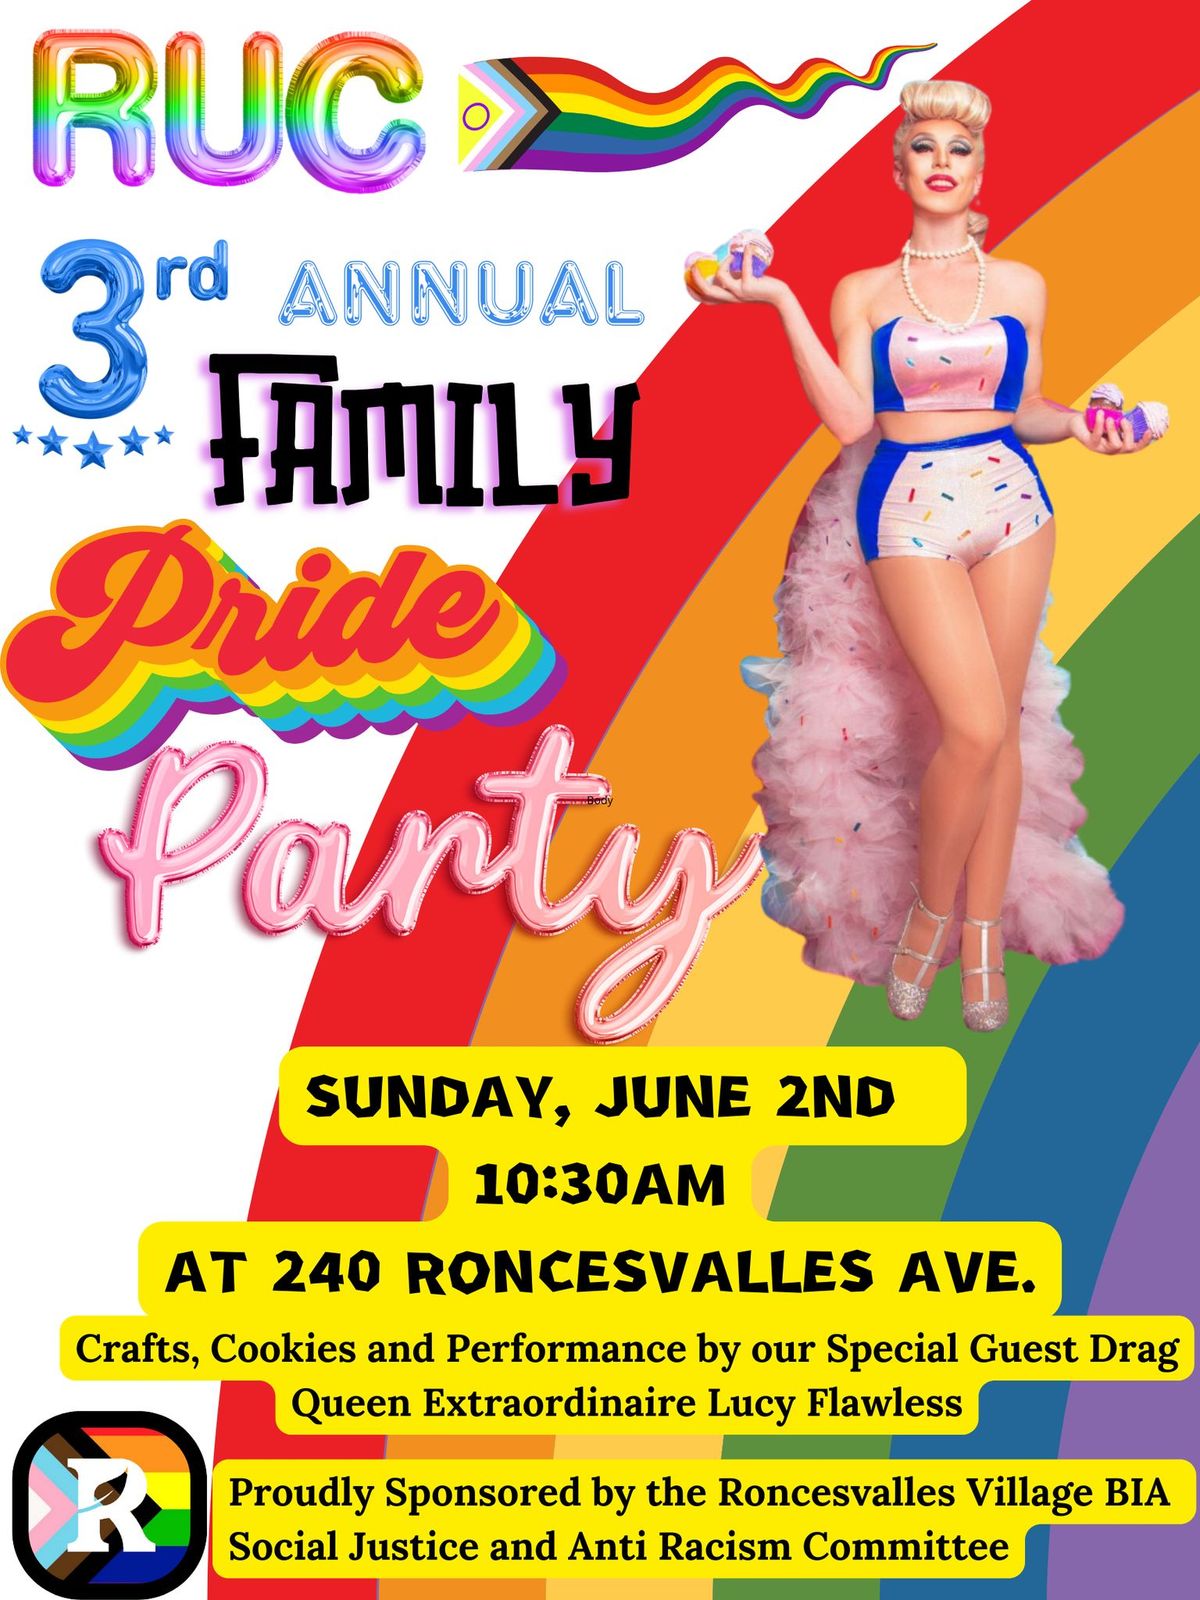 3rd Annual FREE RUC Family Pride Party!